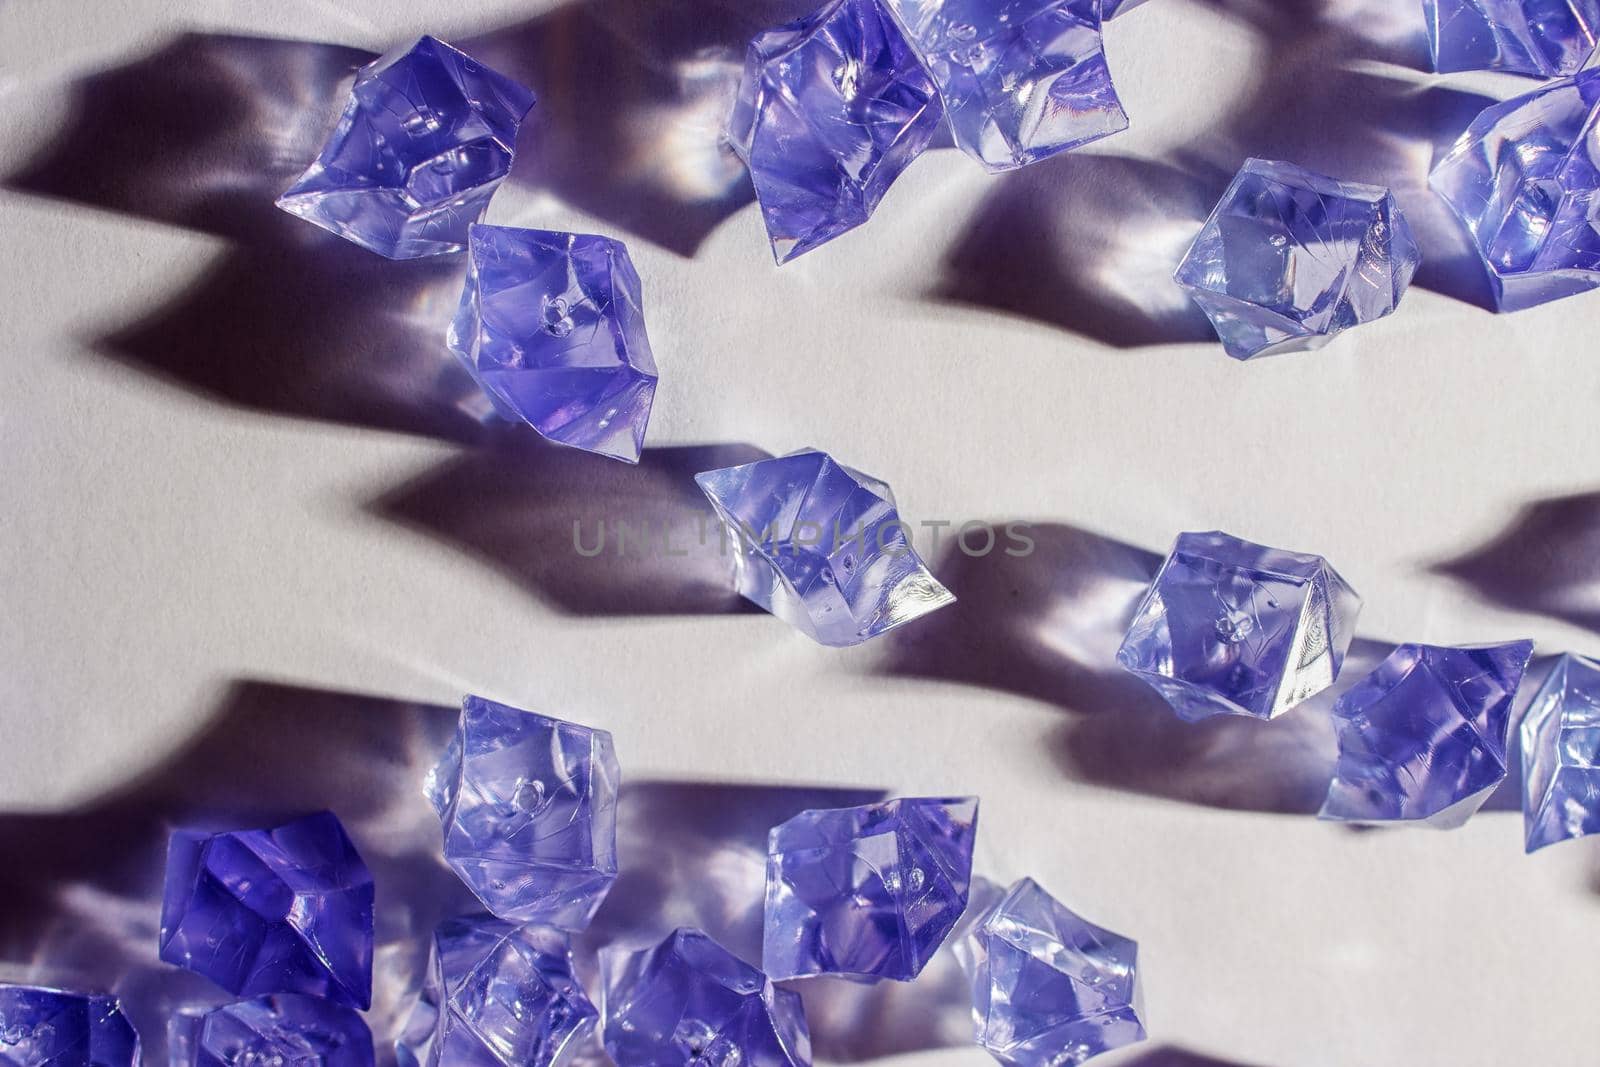 blue glass crystals on the table indoor closeup